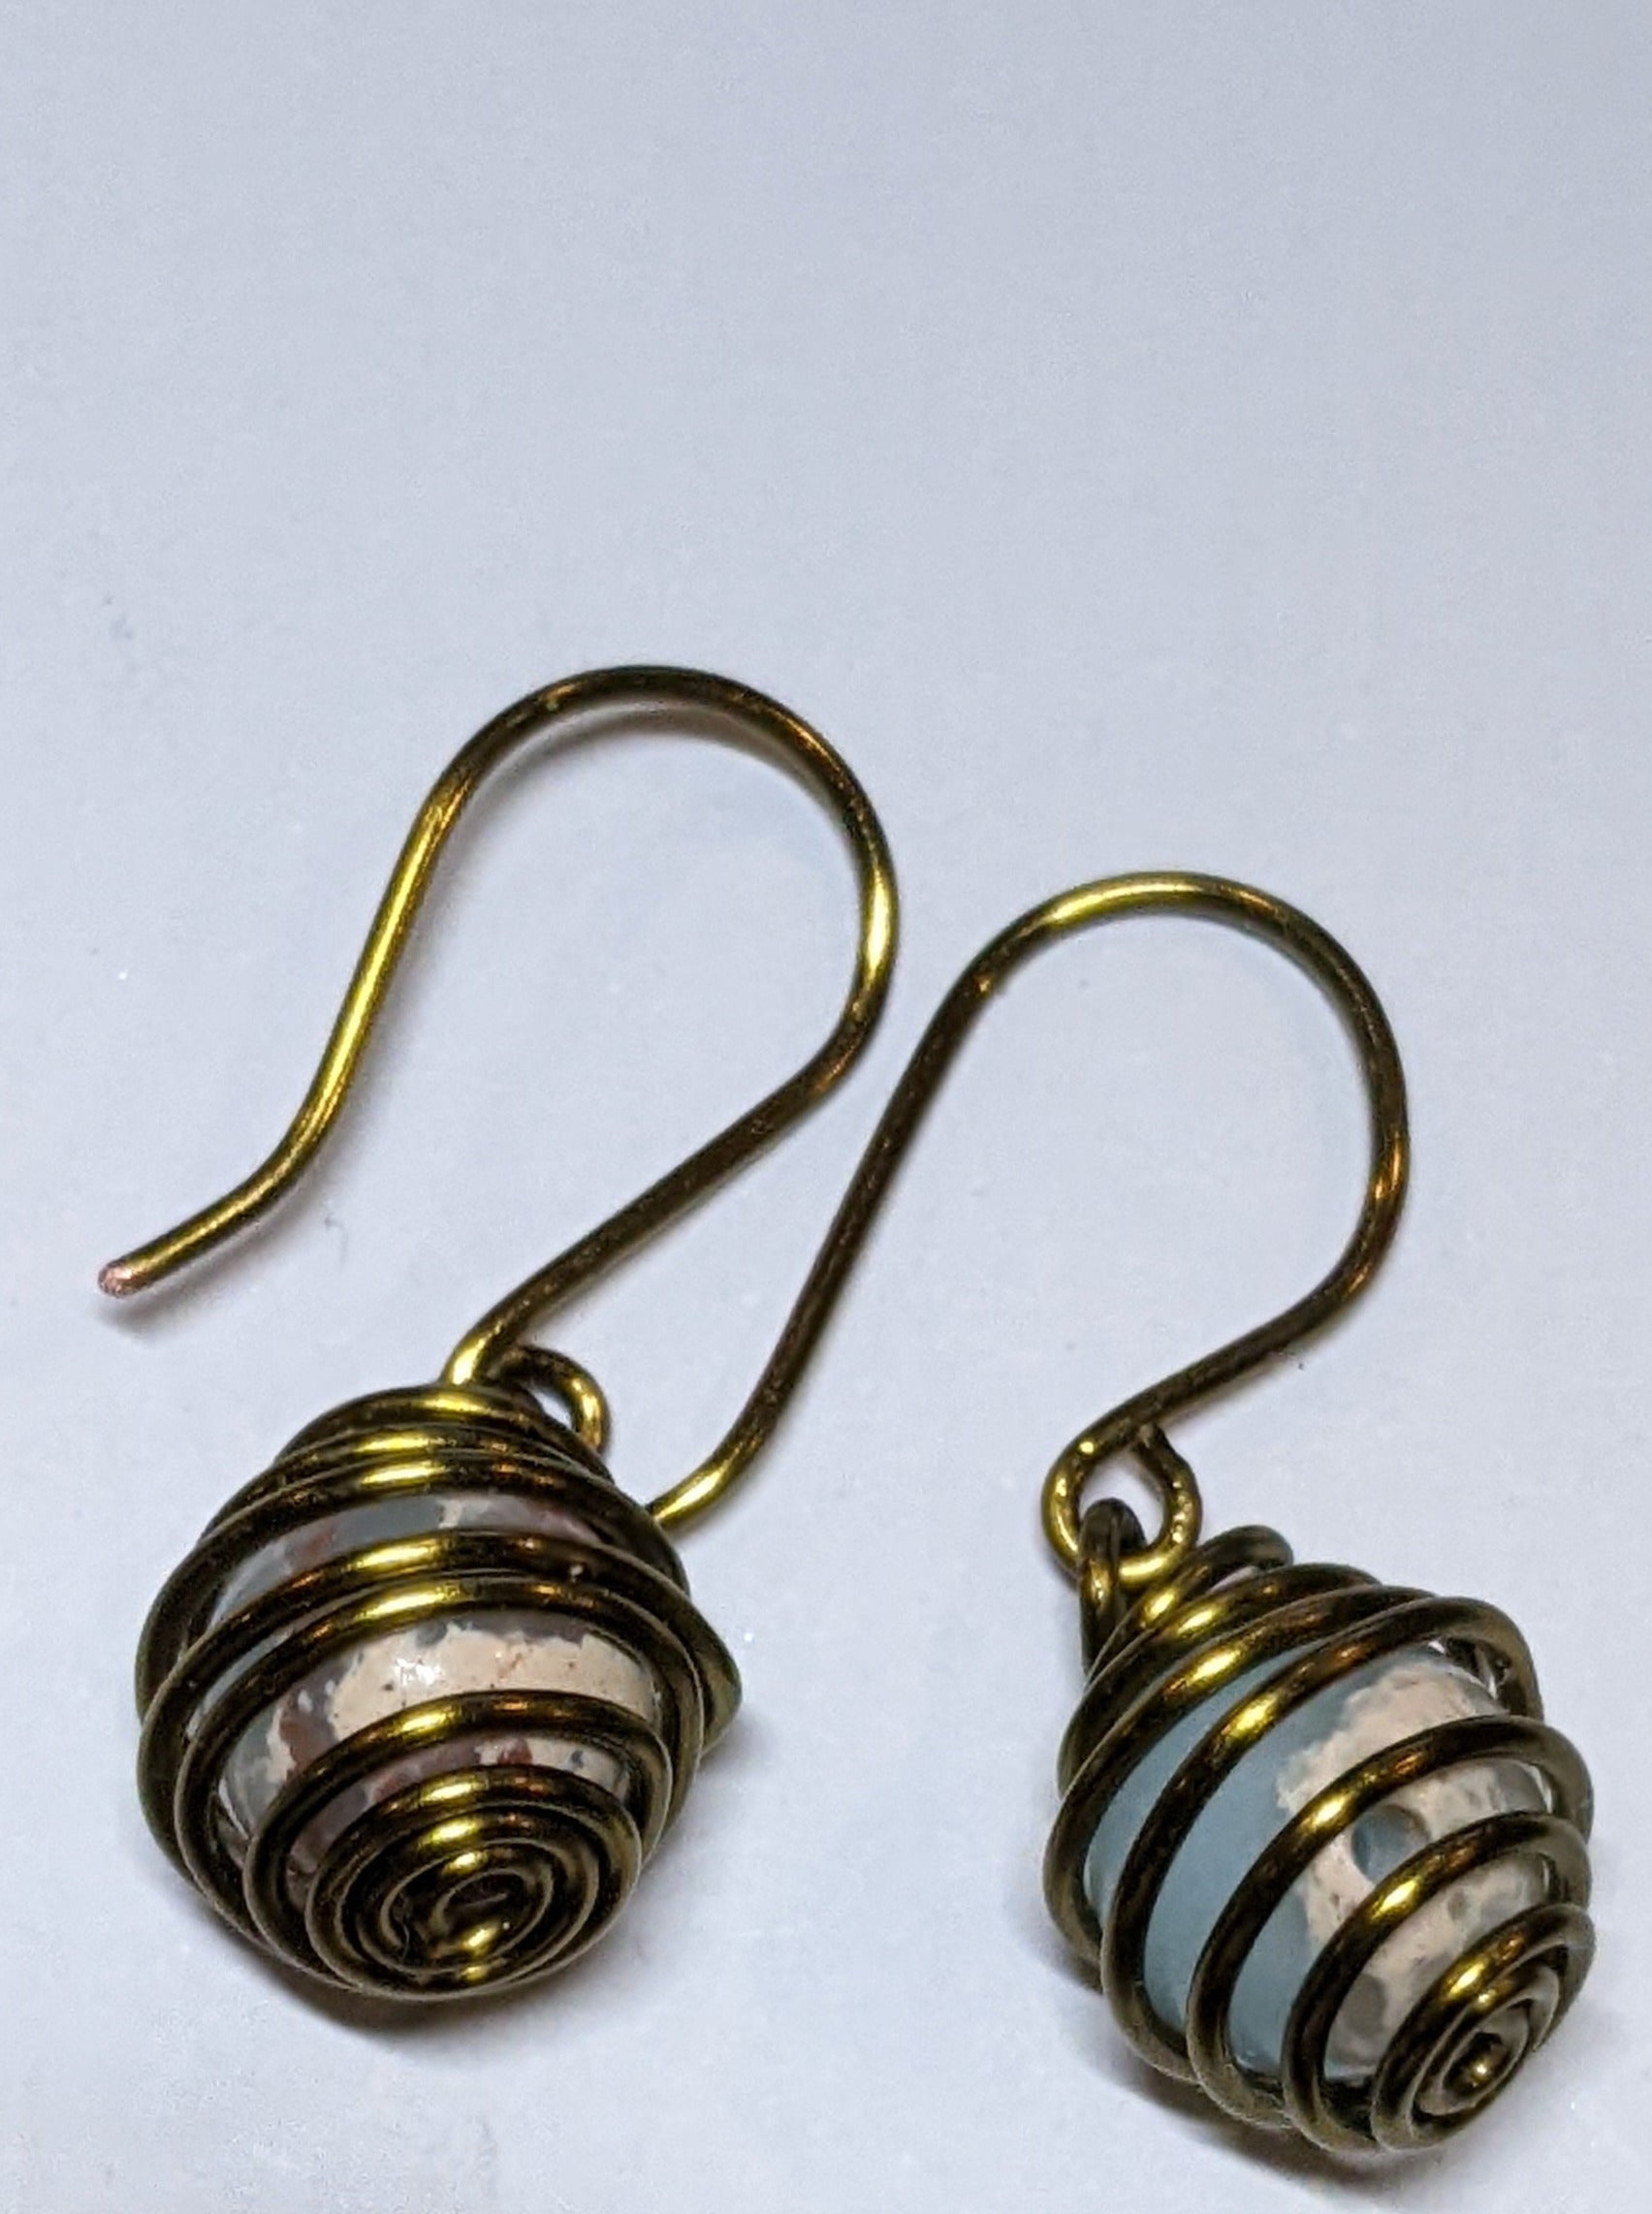 Close up of caged bead earrings made of bronze wire and jasper beads